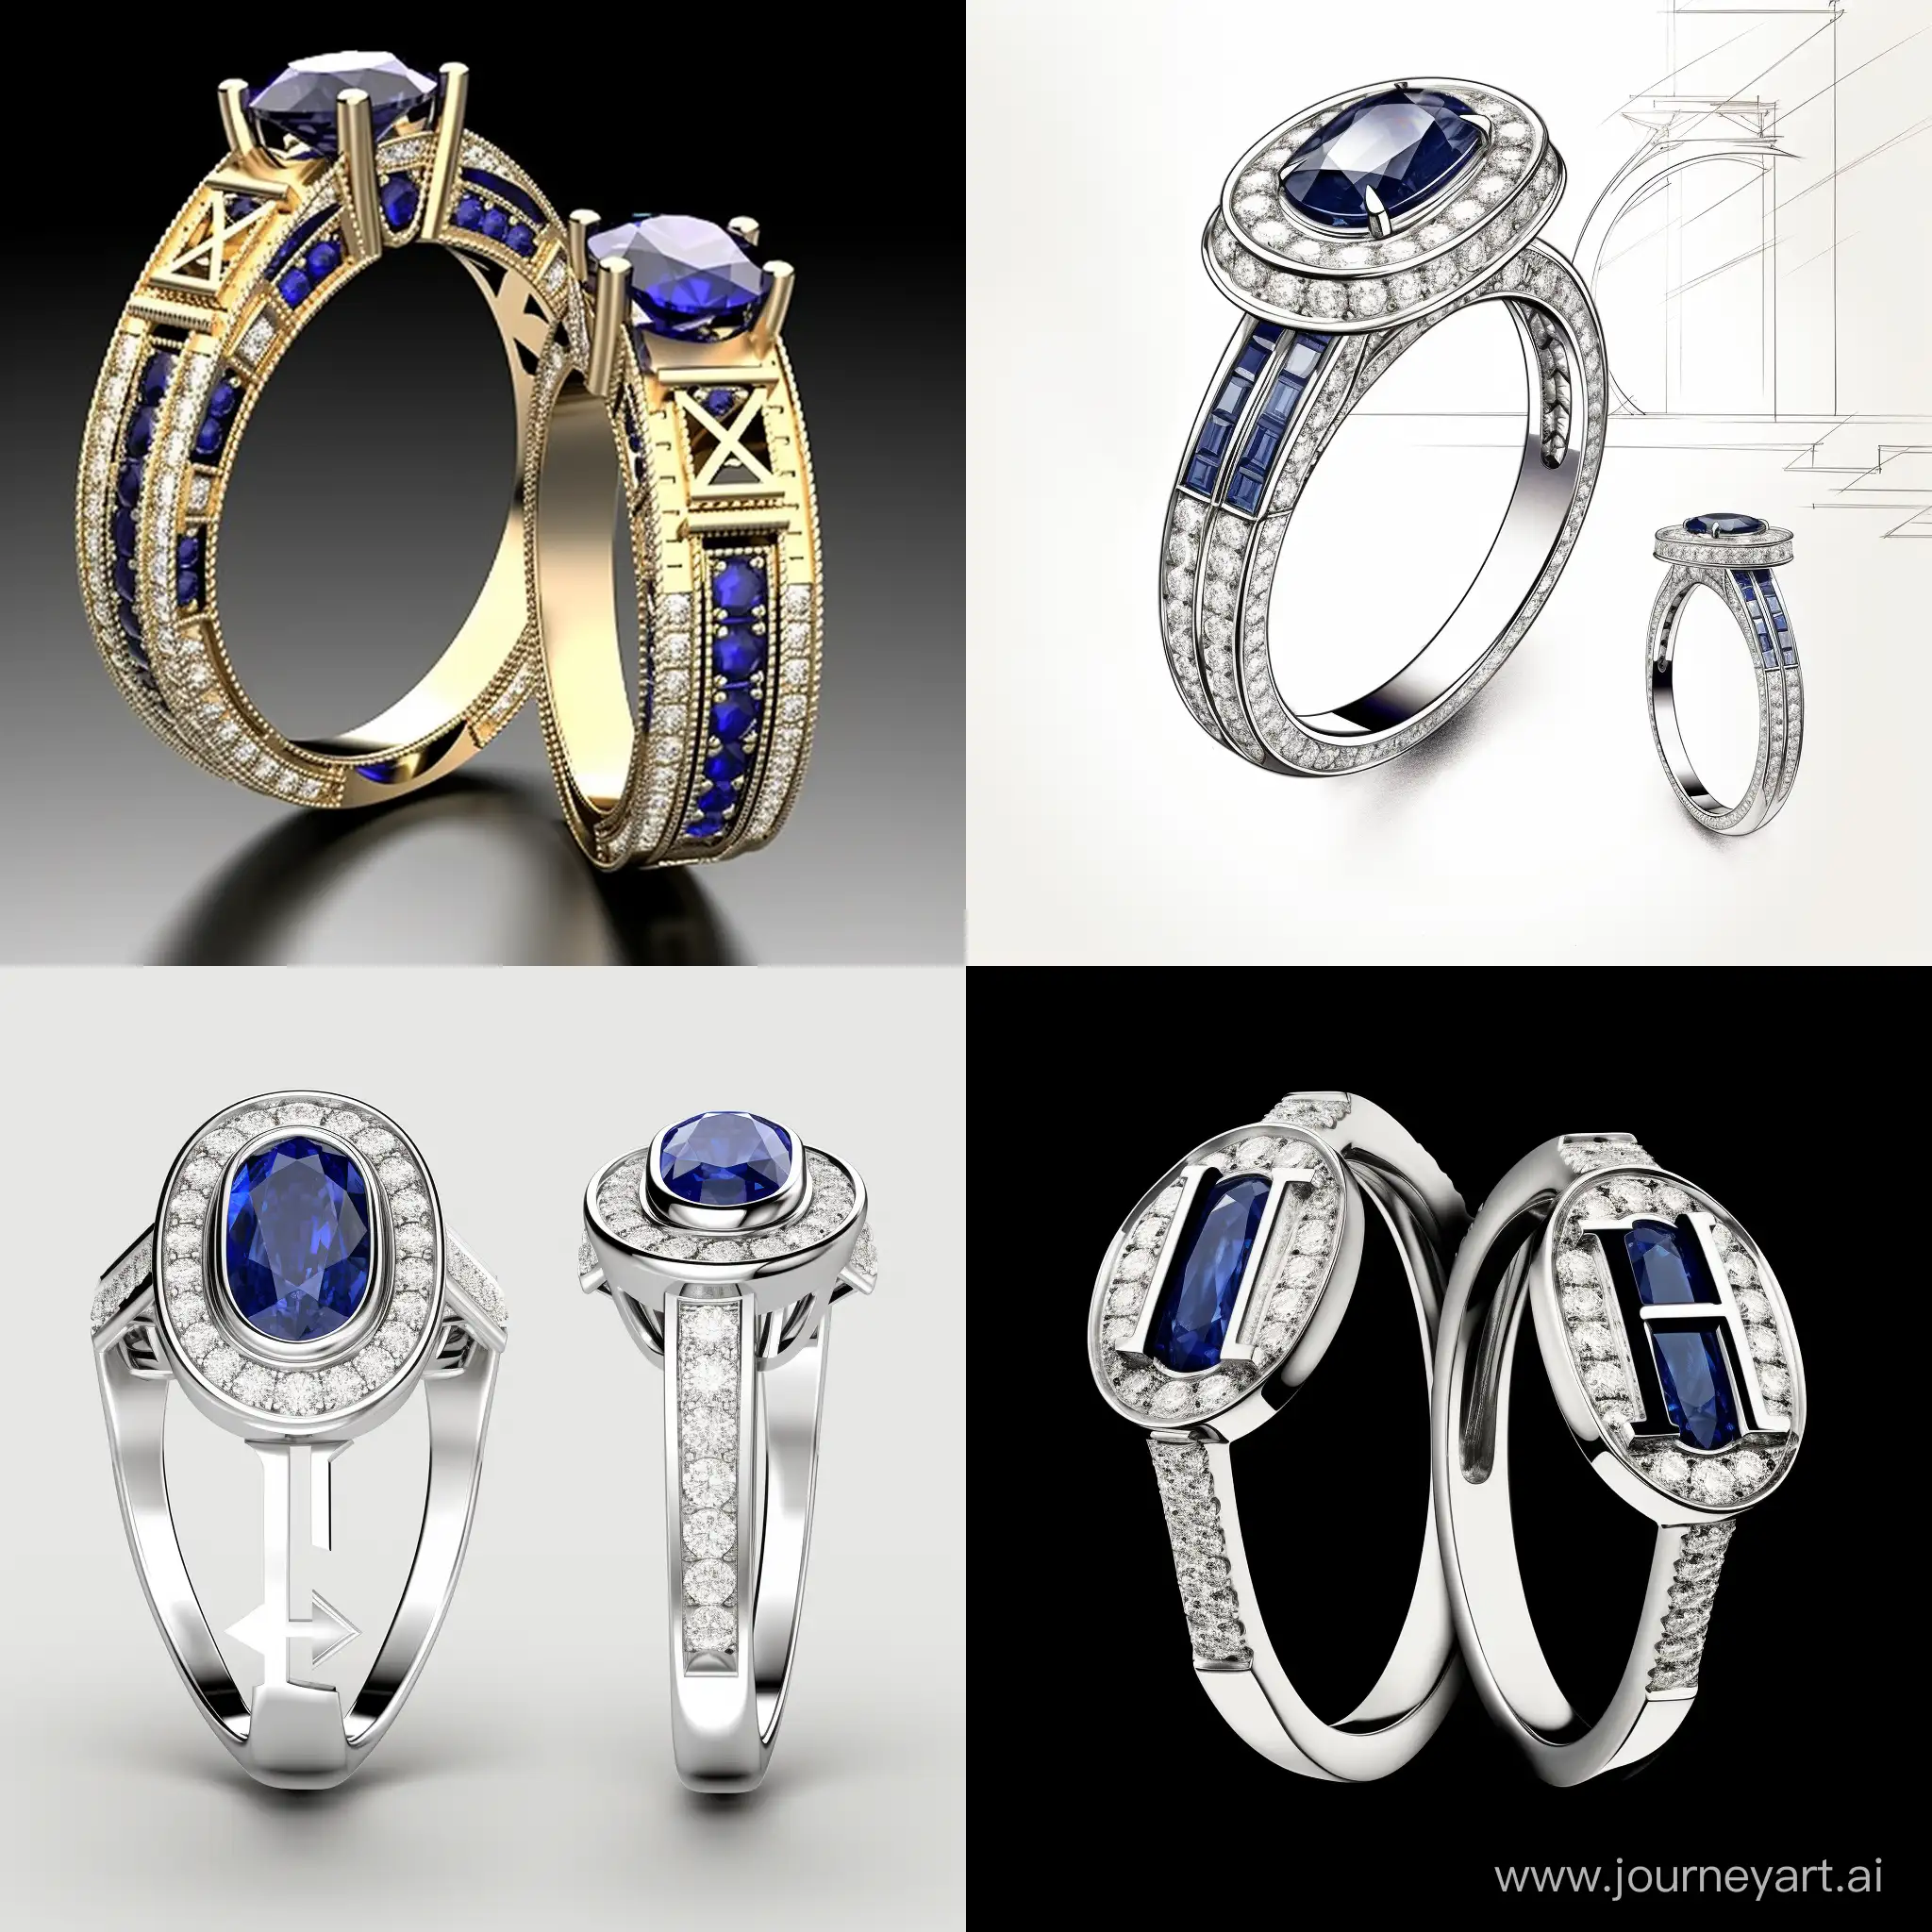 Exquisite-1Carat-Oval-Royal-Sapphire-Ring-with-Dual-H-Initials